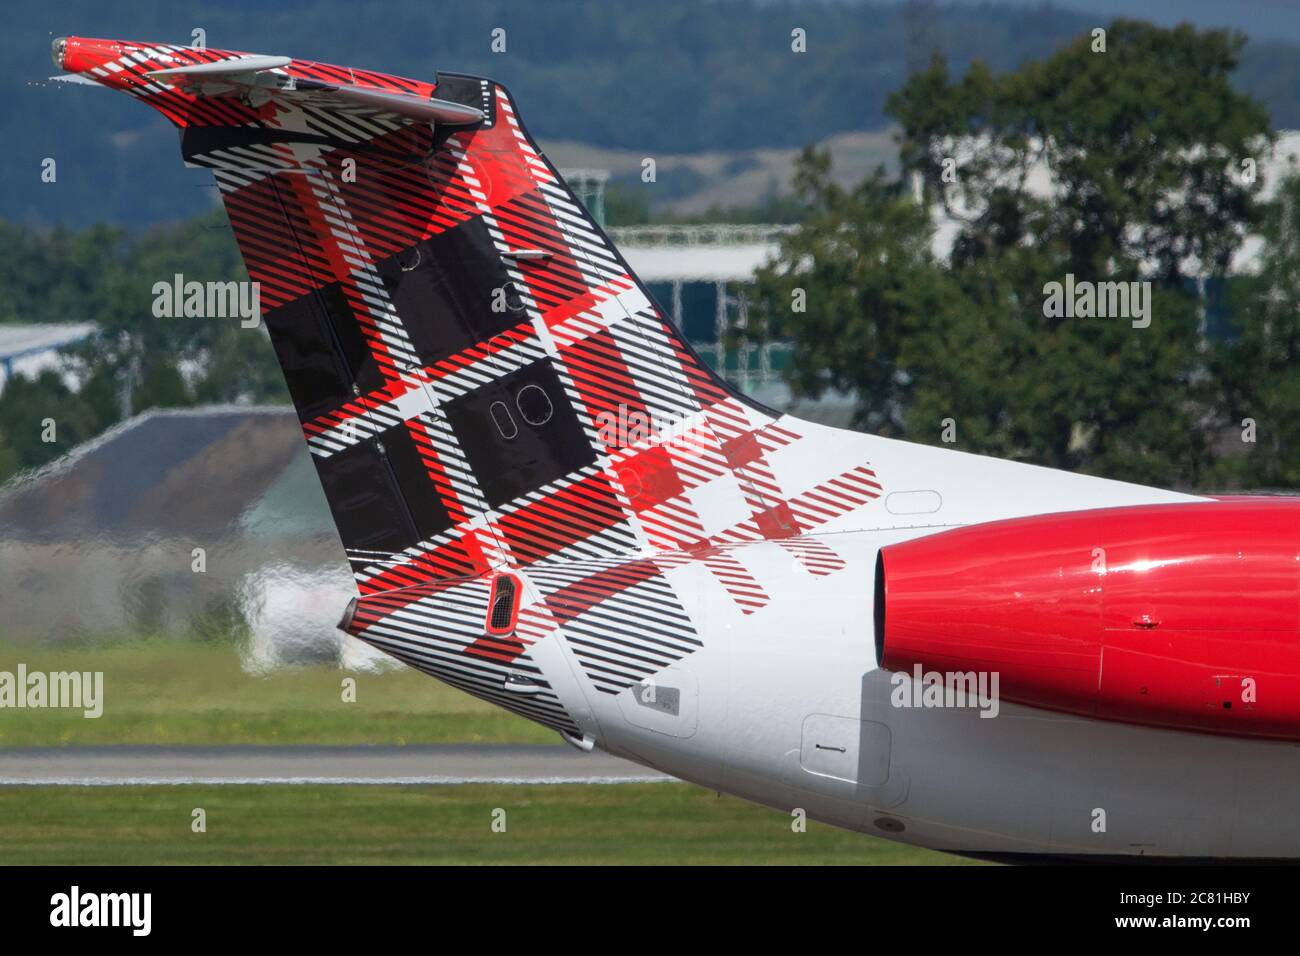 Glasgow, Scotland, UK. 20th July, 2020. Pictured: Loganair Embraer ERJ145 plane seen at Glasgow Airport. Credit: Colin Fisher/Alamy Live News Stock Photo